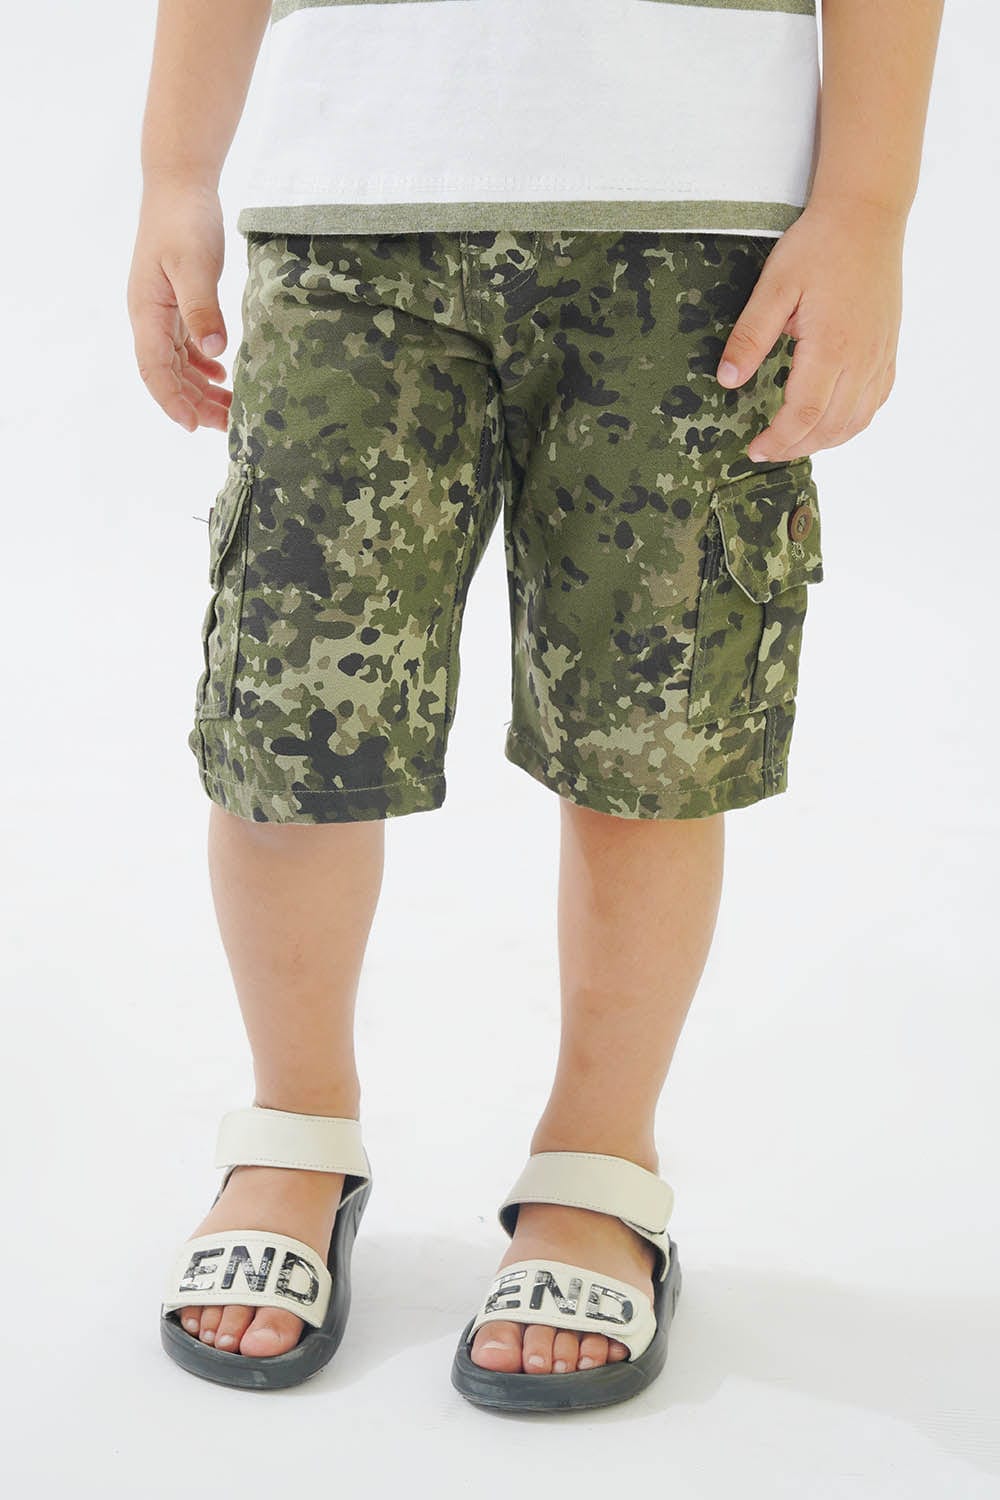 Hope Not Out by Shahid Afridi Boys Non Denim Shorts Camo Graphic Shorts